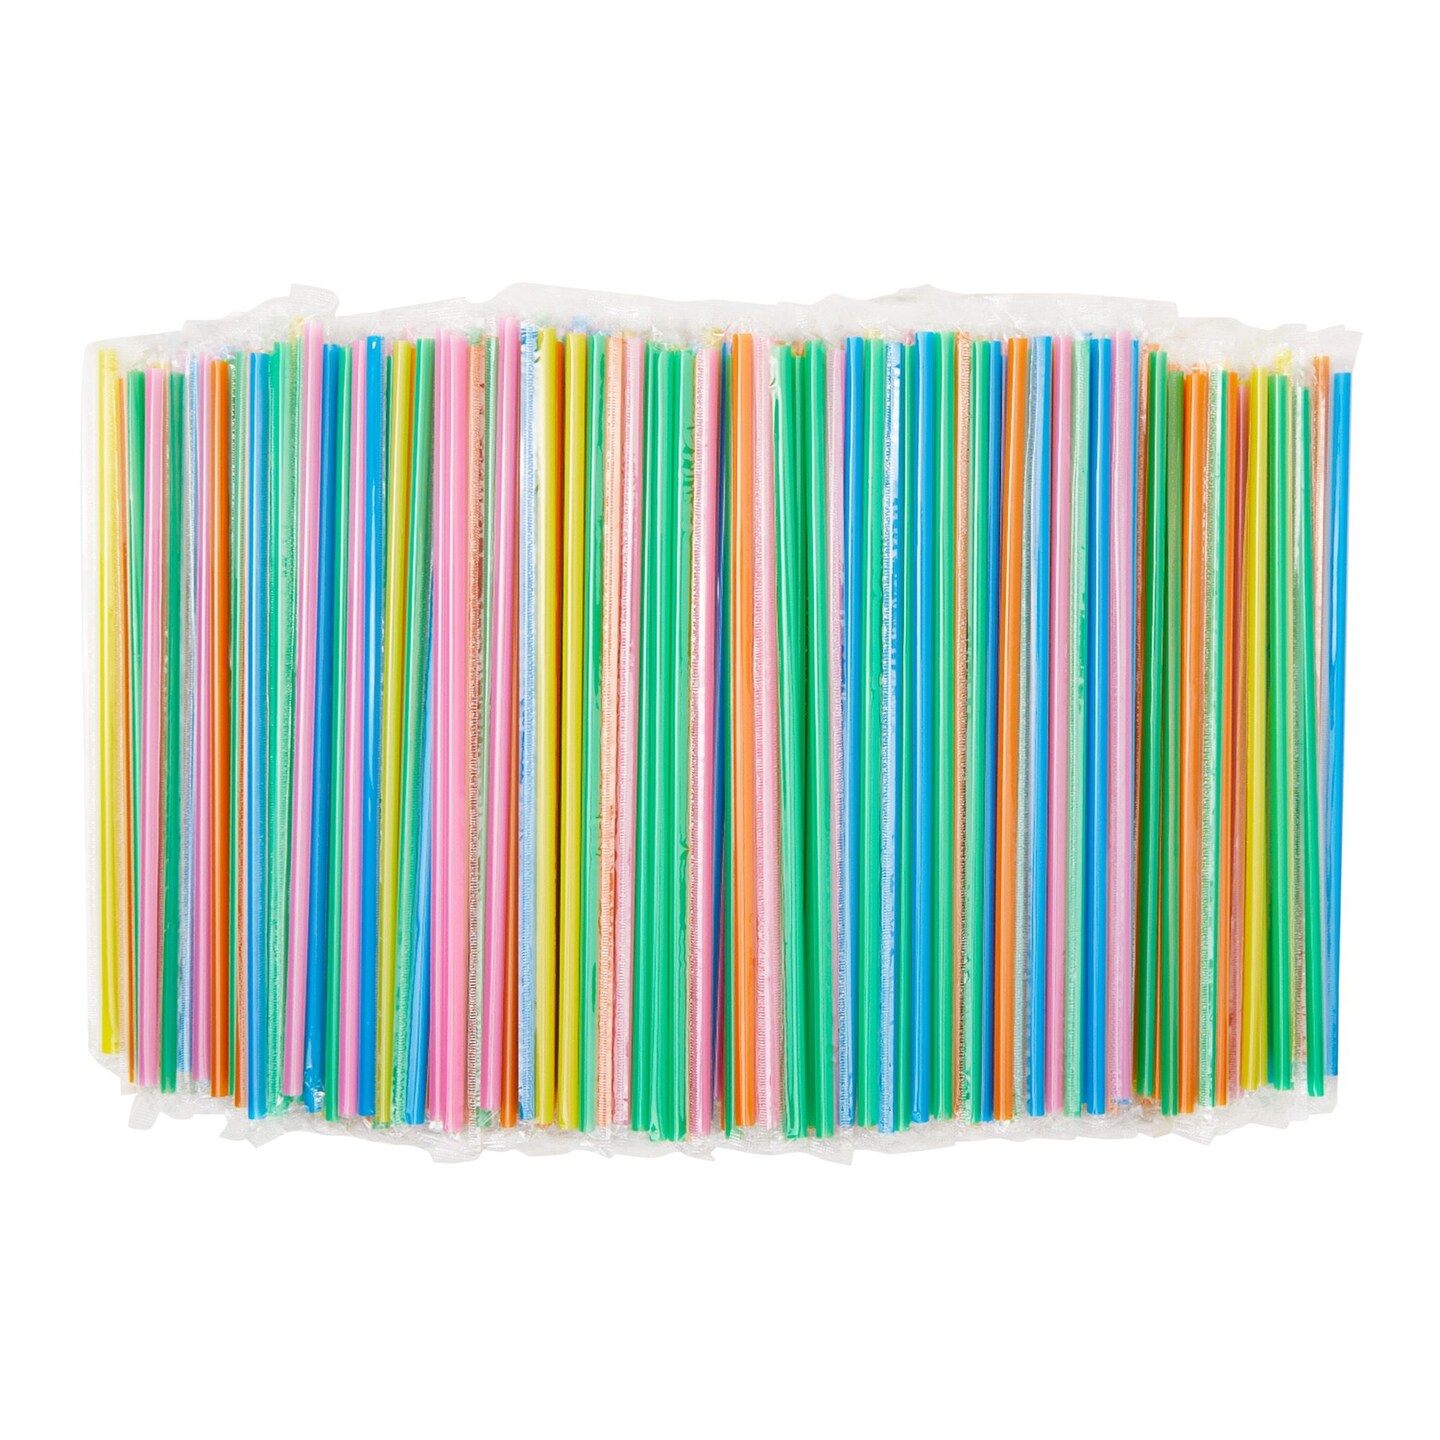 Individually Wrapped Plastic Drinking Straws, Extra Long, Bulk Set in 5 Colors (600 Pack)